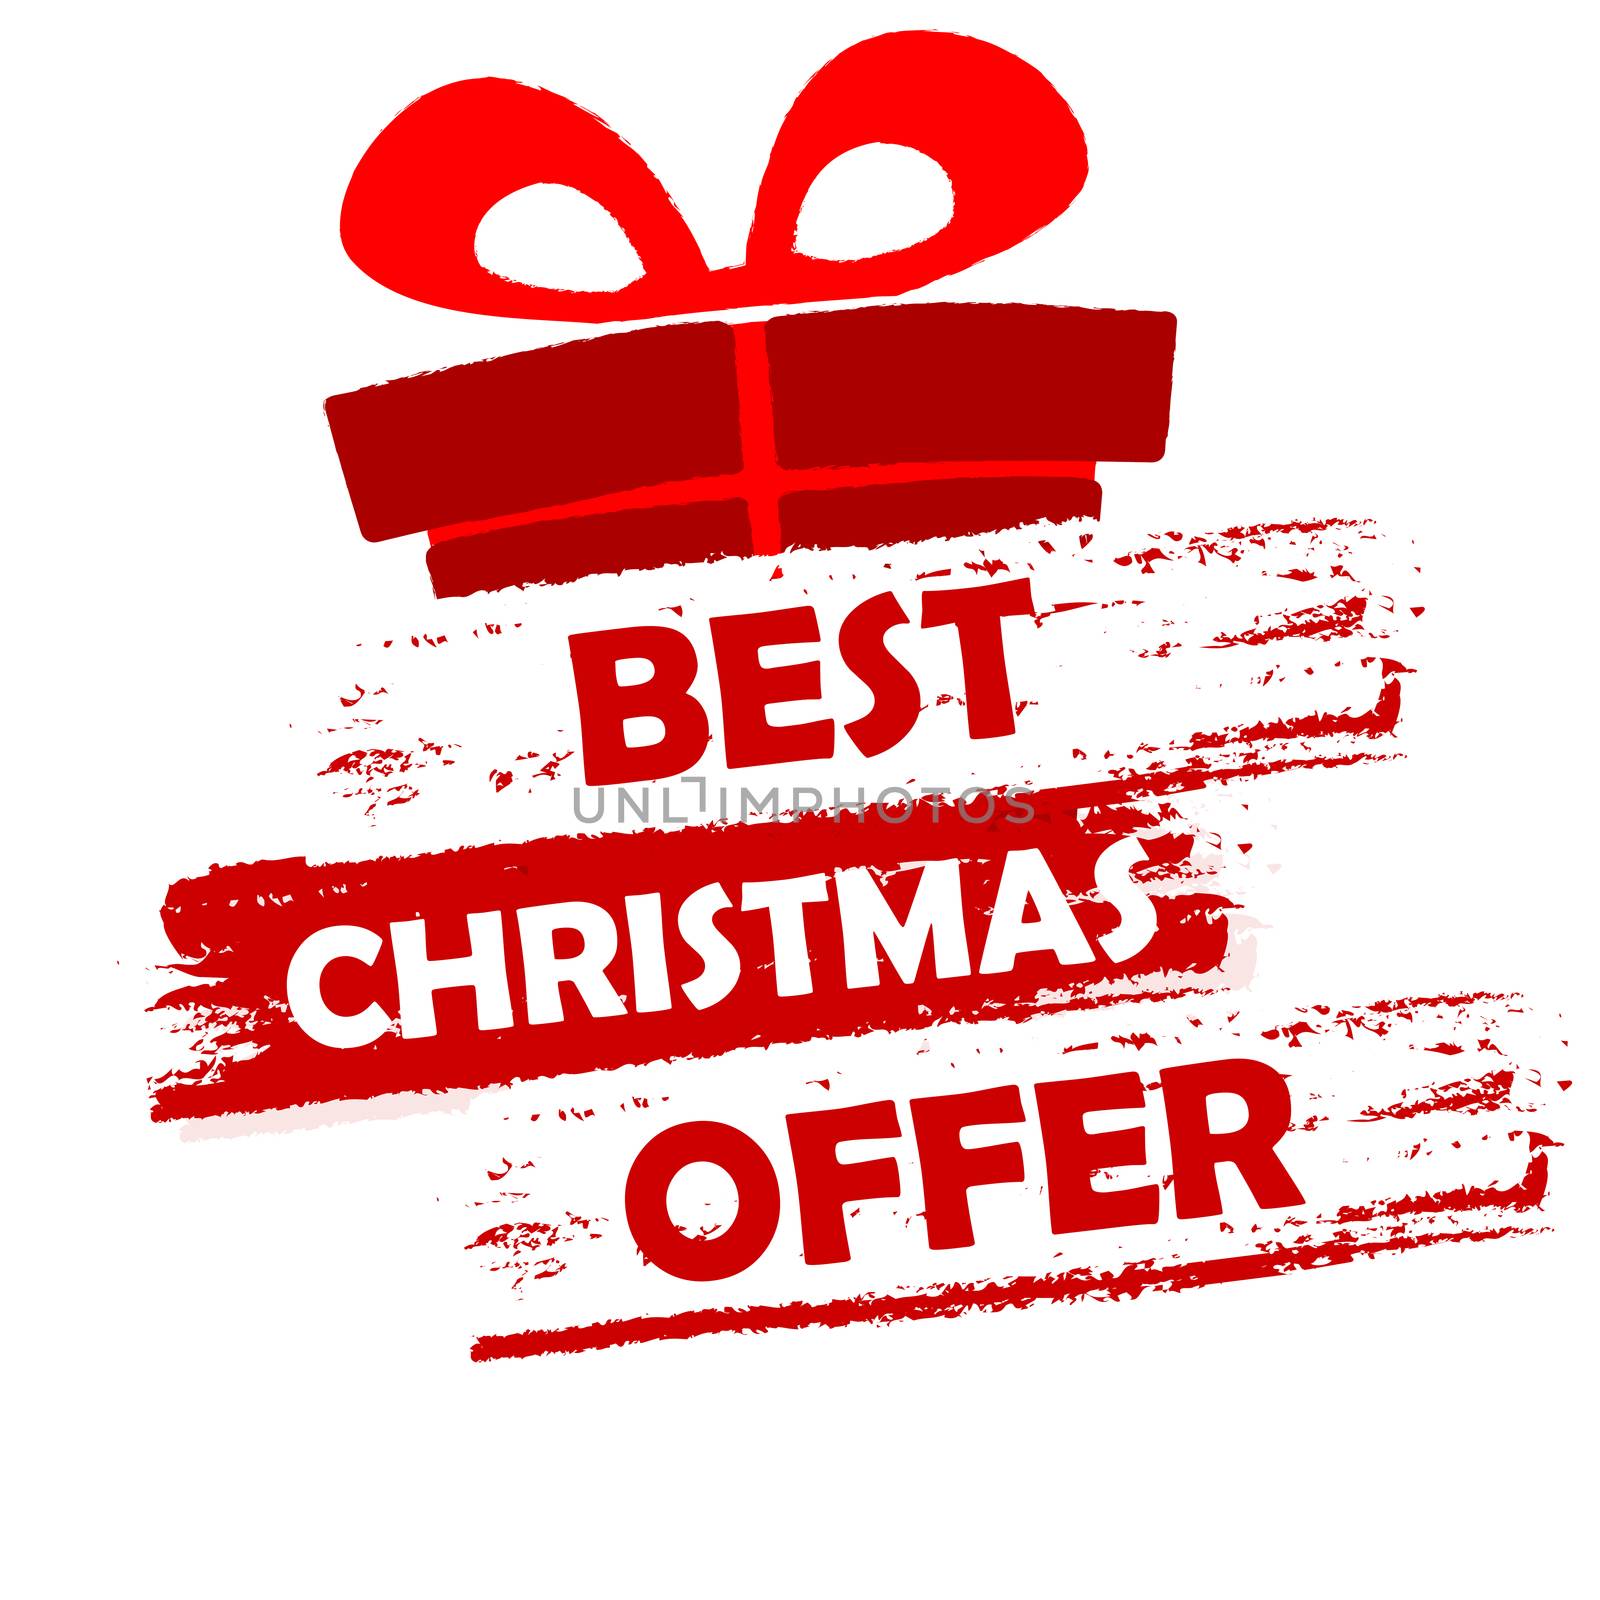 best christmas offer by marinini